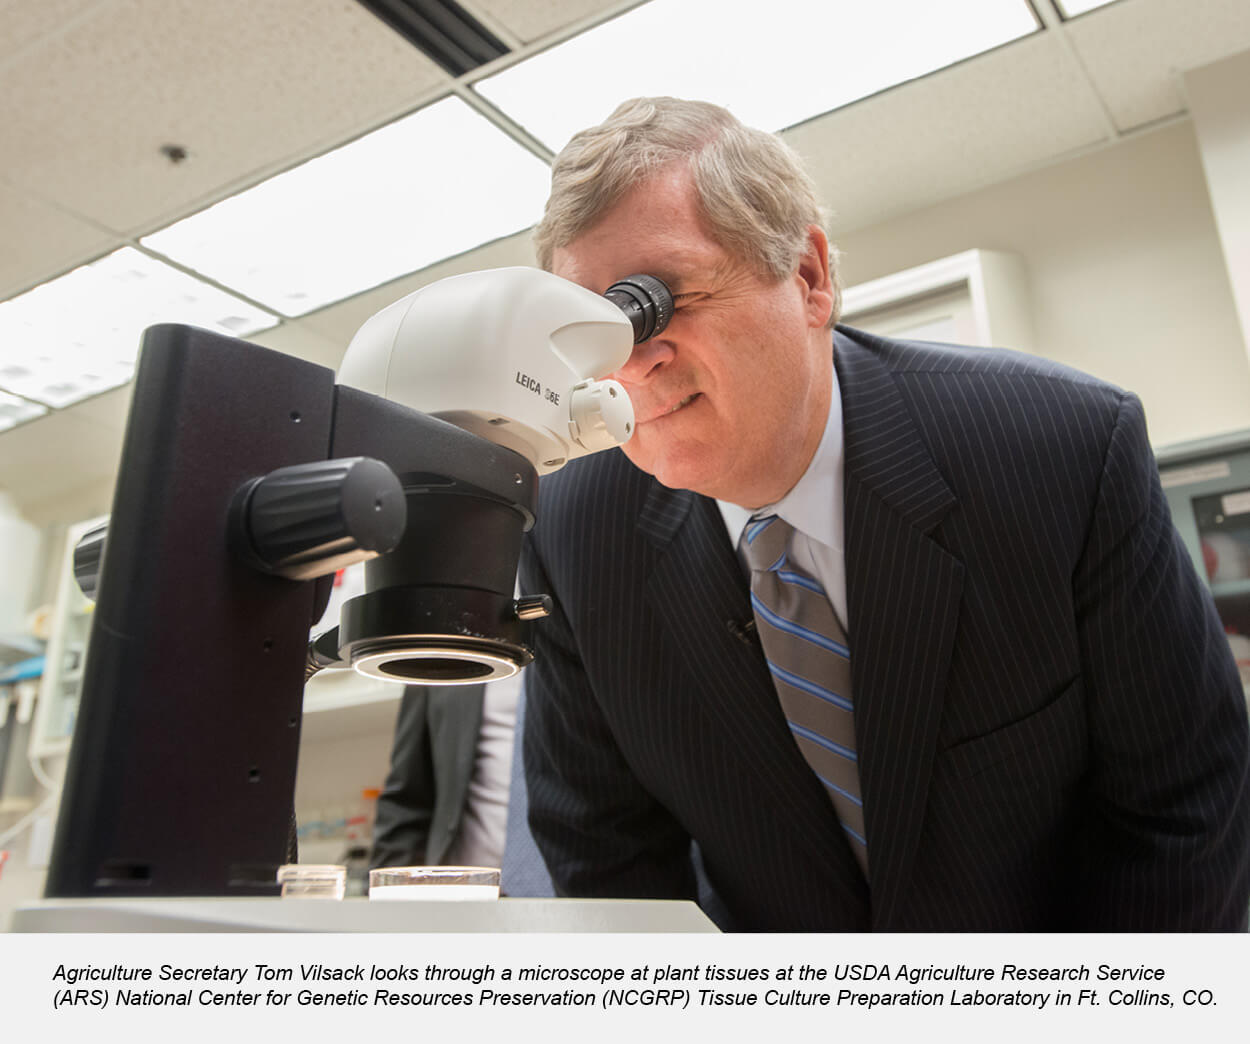 Agriculture Secretary Tom Vilsack looks through a microscope at plant tissues at the USDA Agriculture Research Service (ARS) National Center for Genet